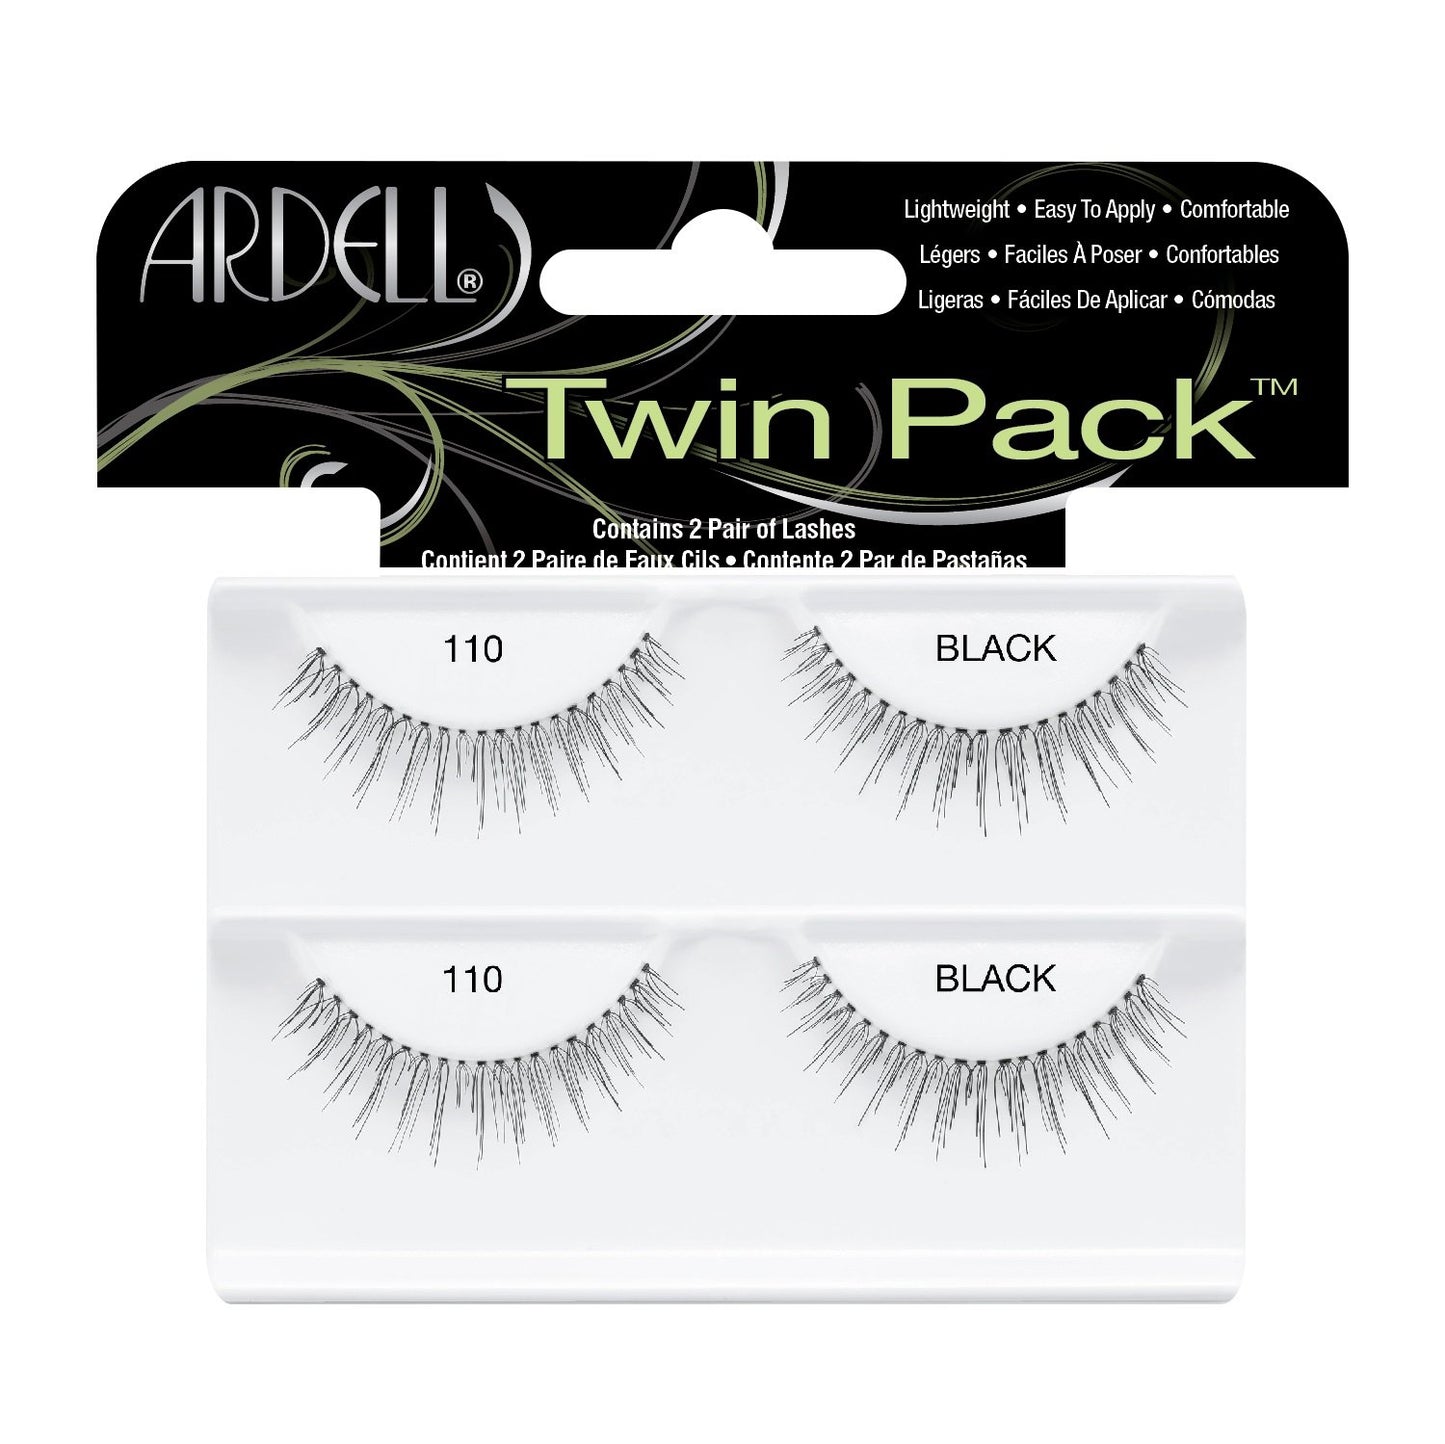 Ardell Twin Pack EyeLashes 110